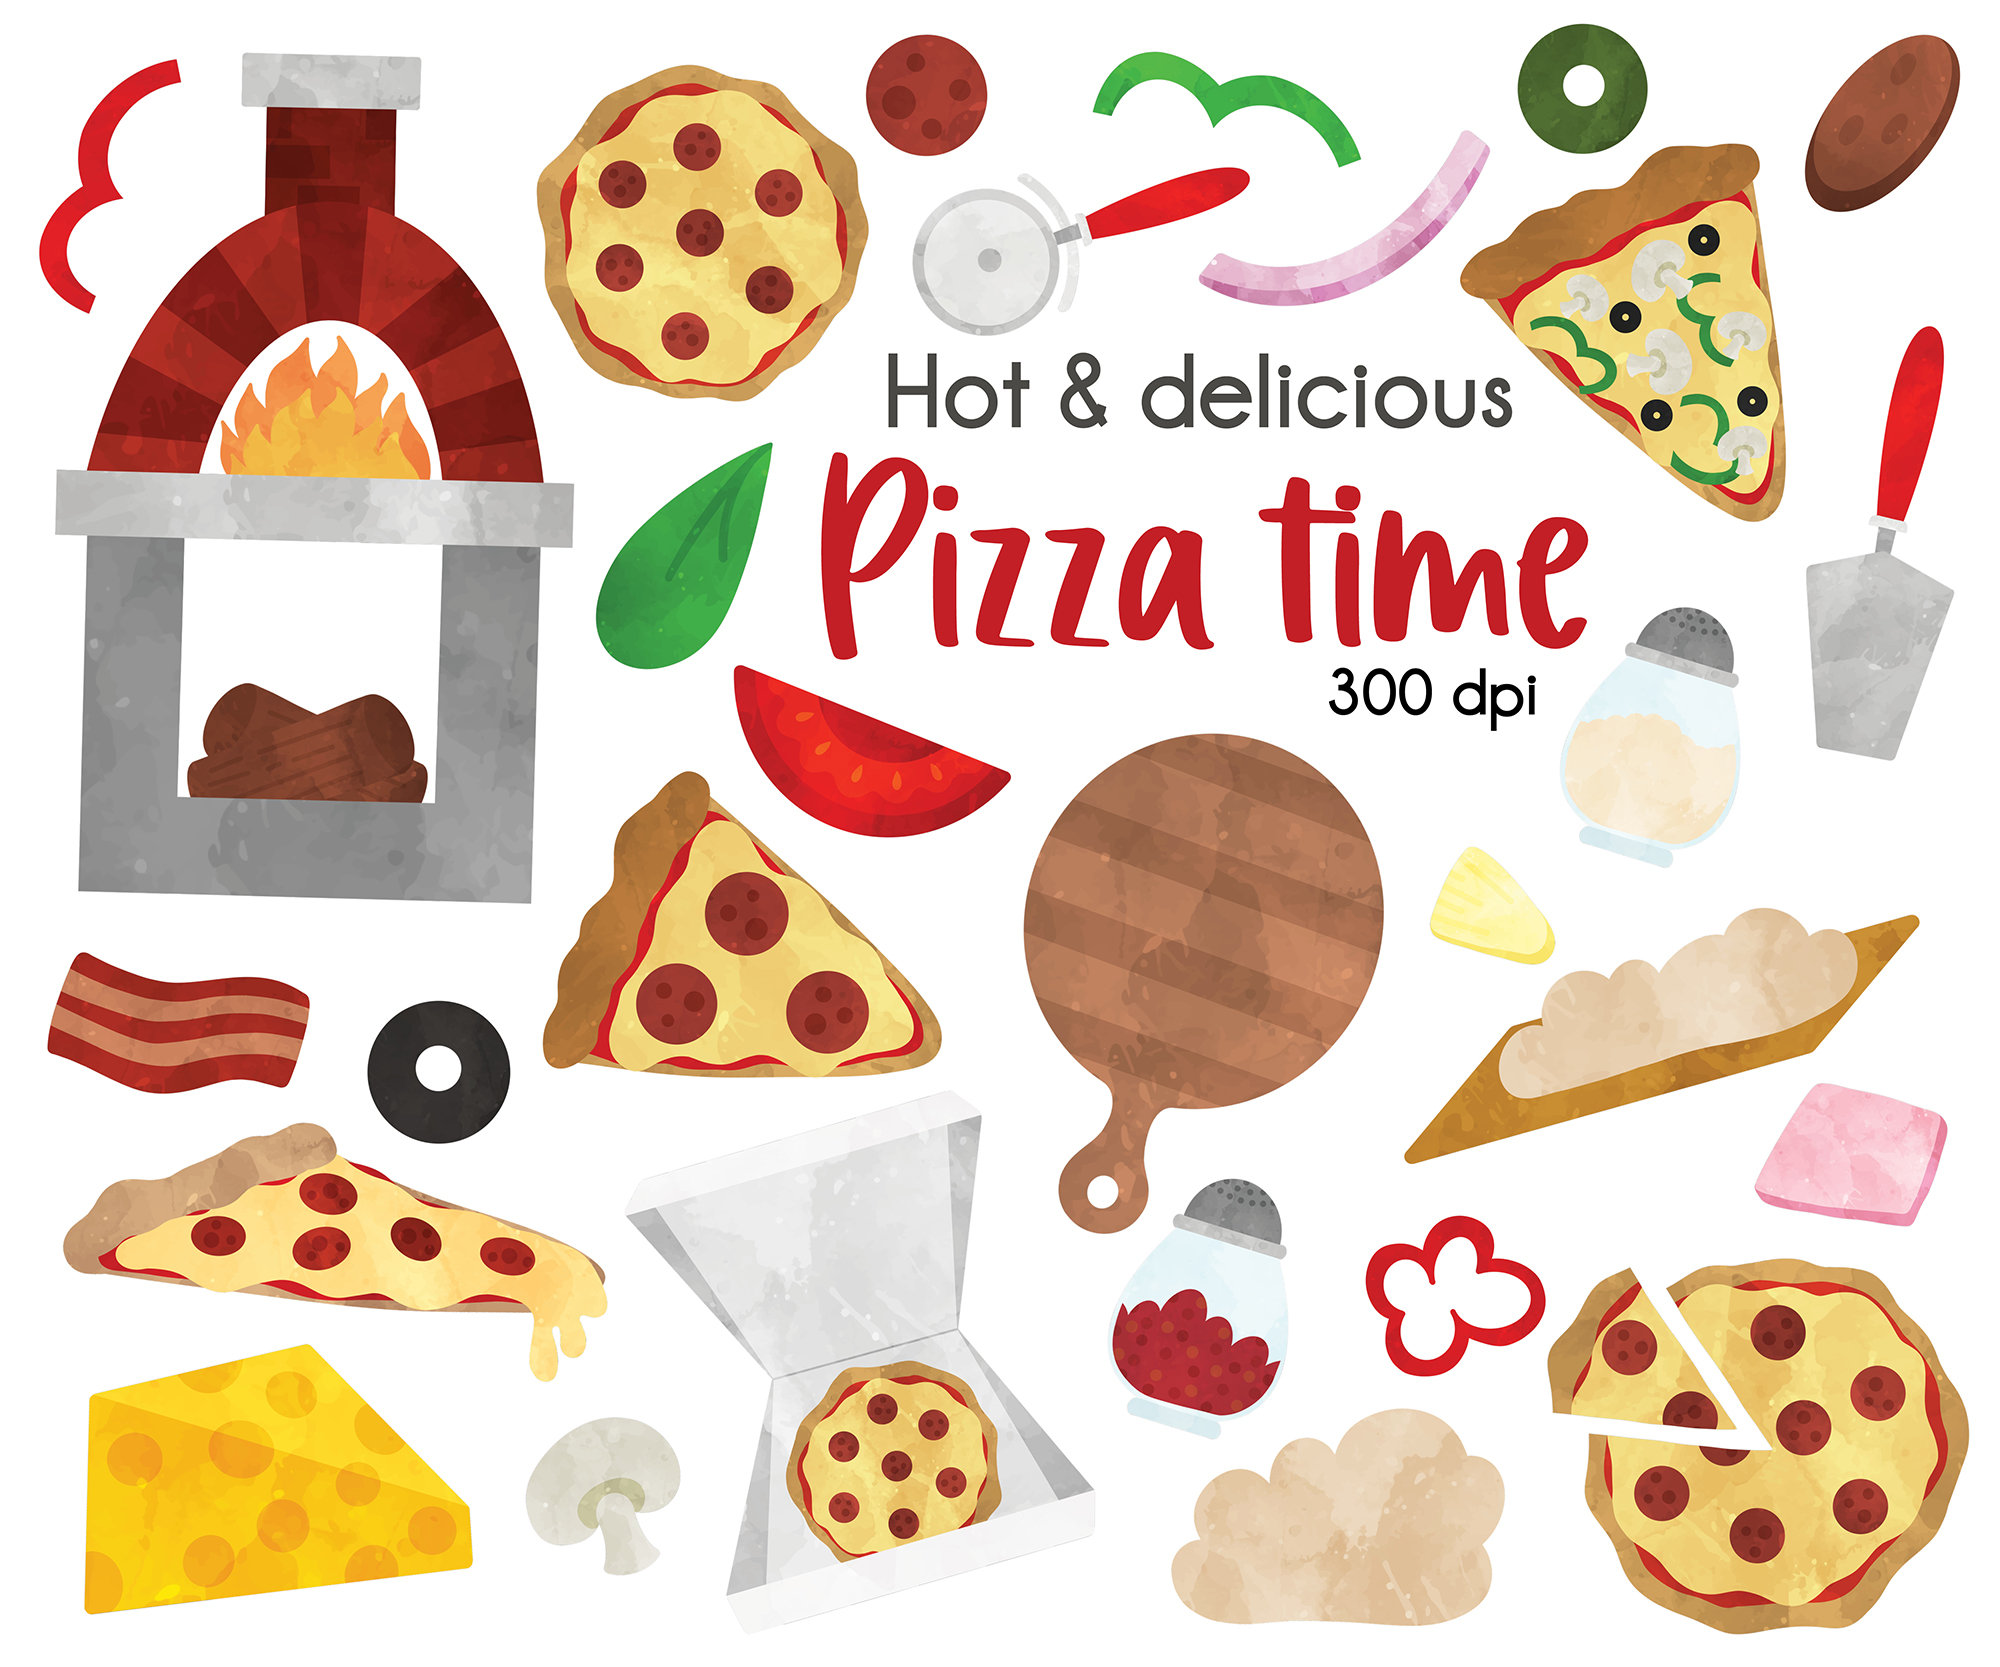 39 Pizza Clipart and Patterns Pizza Party Clipart Pizza 